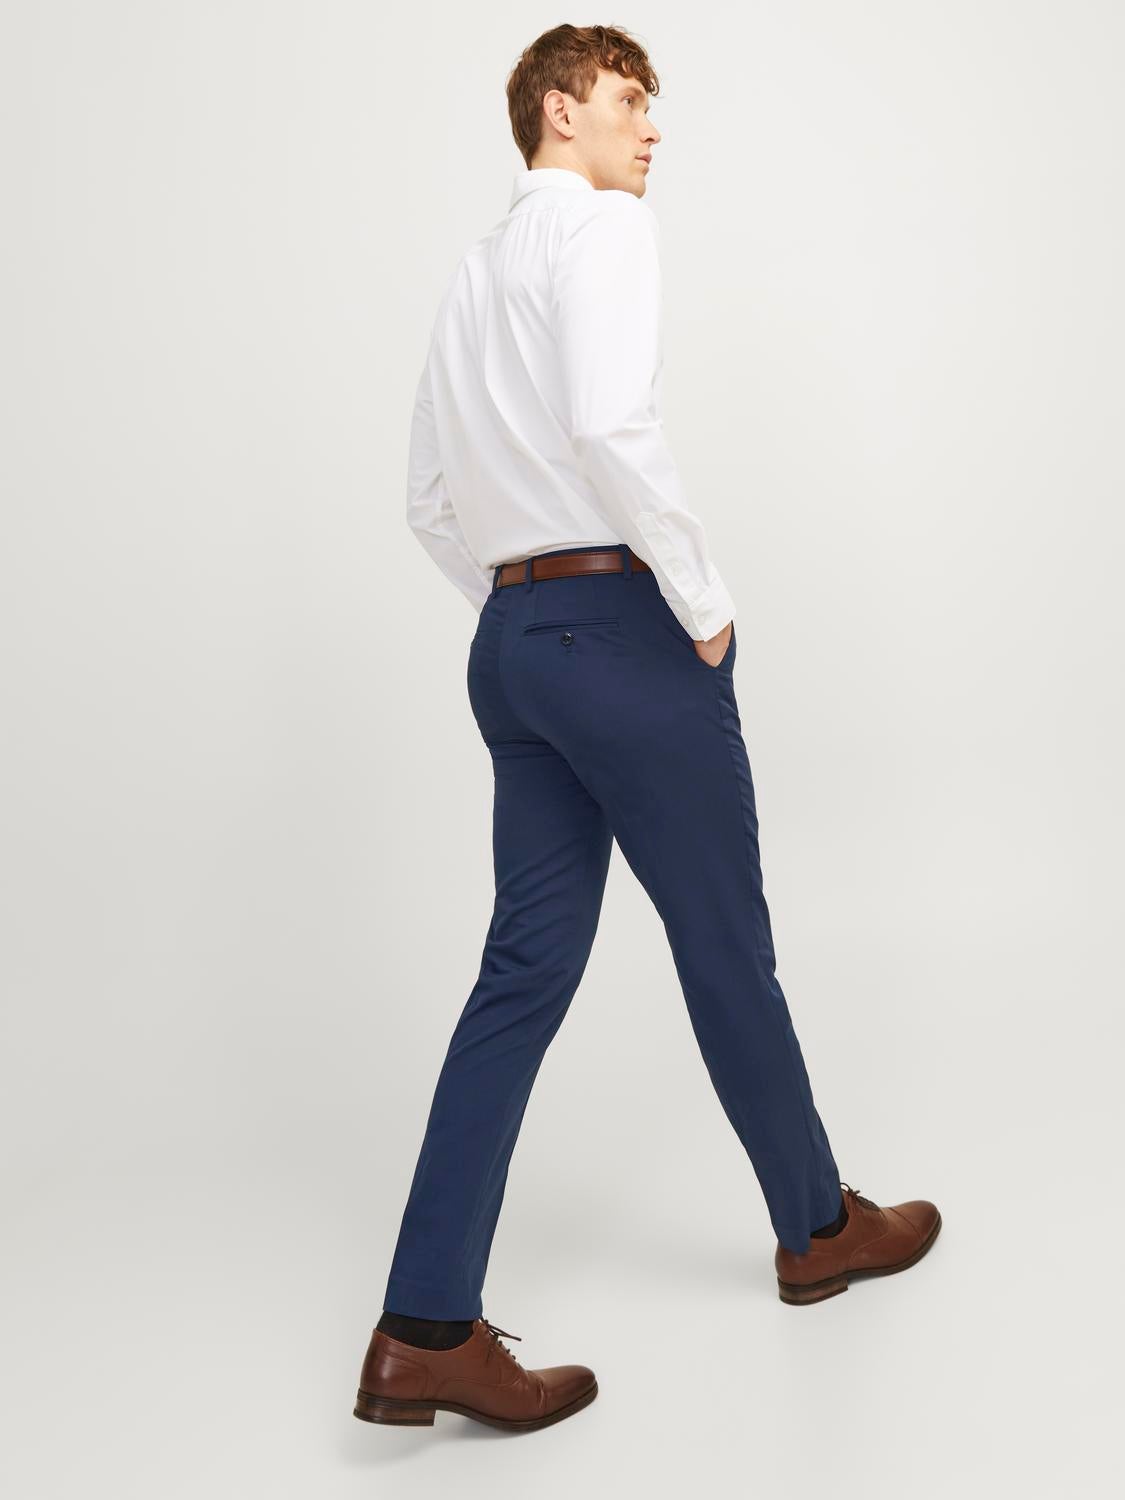 Shirt Colours To Wear With Blue/Navy Pants: 8 Go-To Options